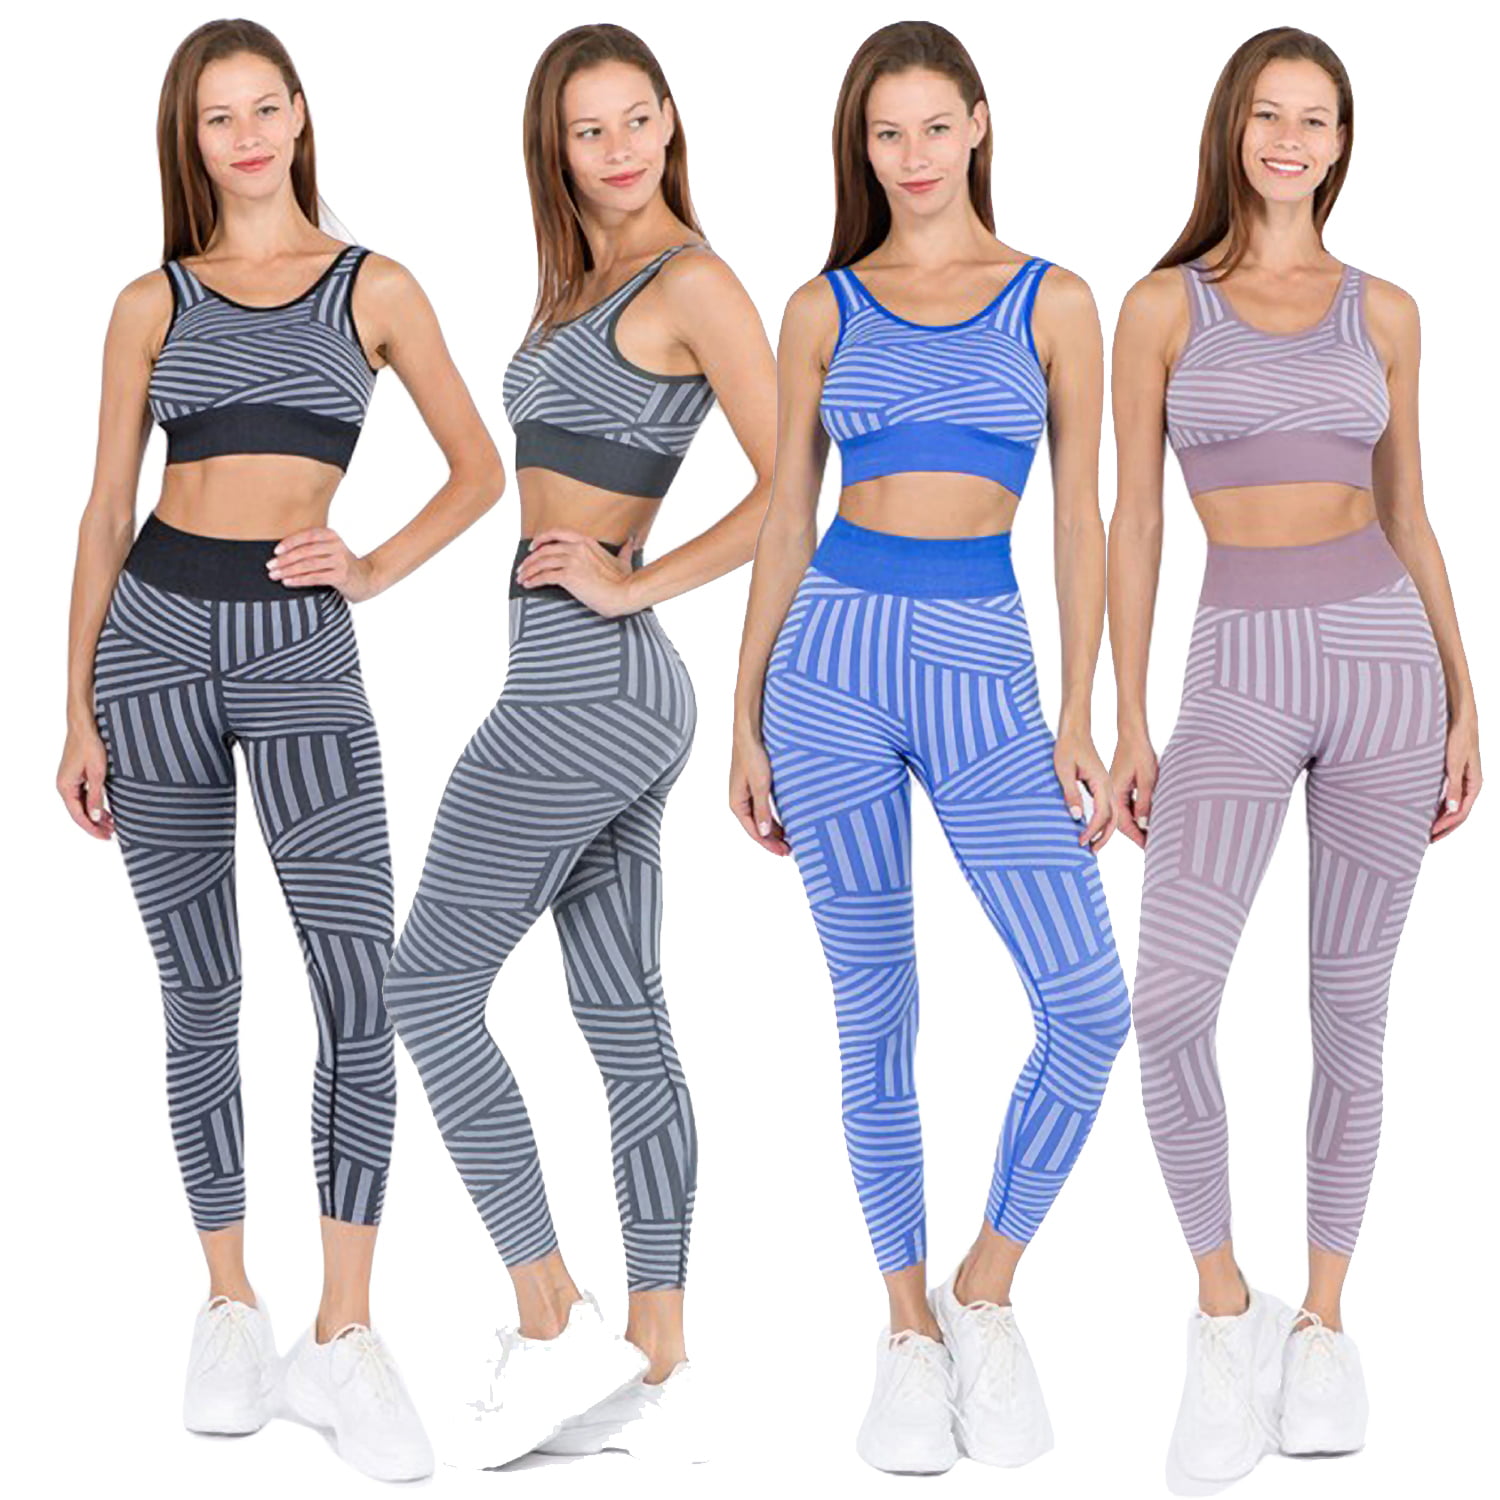 Ulala Brand New Buttery Soft MUST-HAVE Sport Bras and Legging Sport Set 